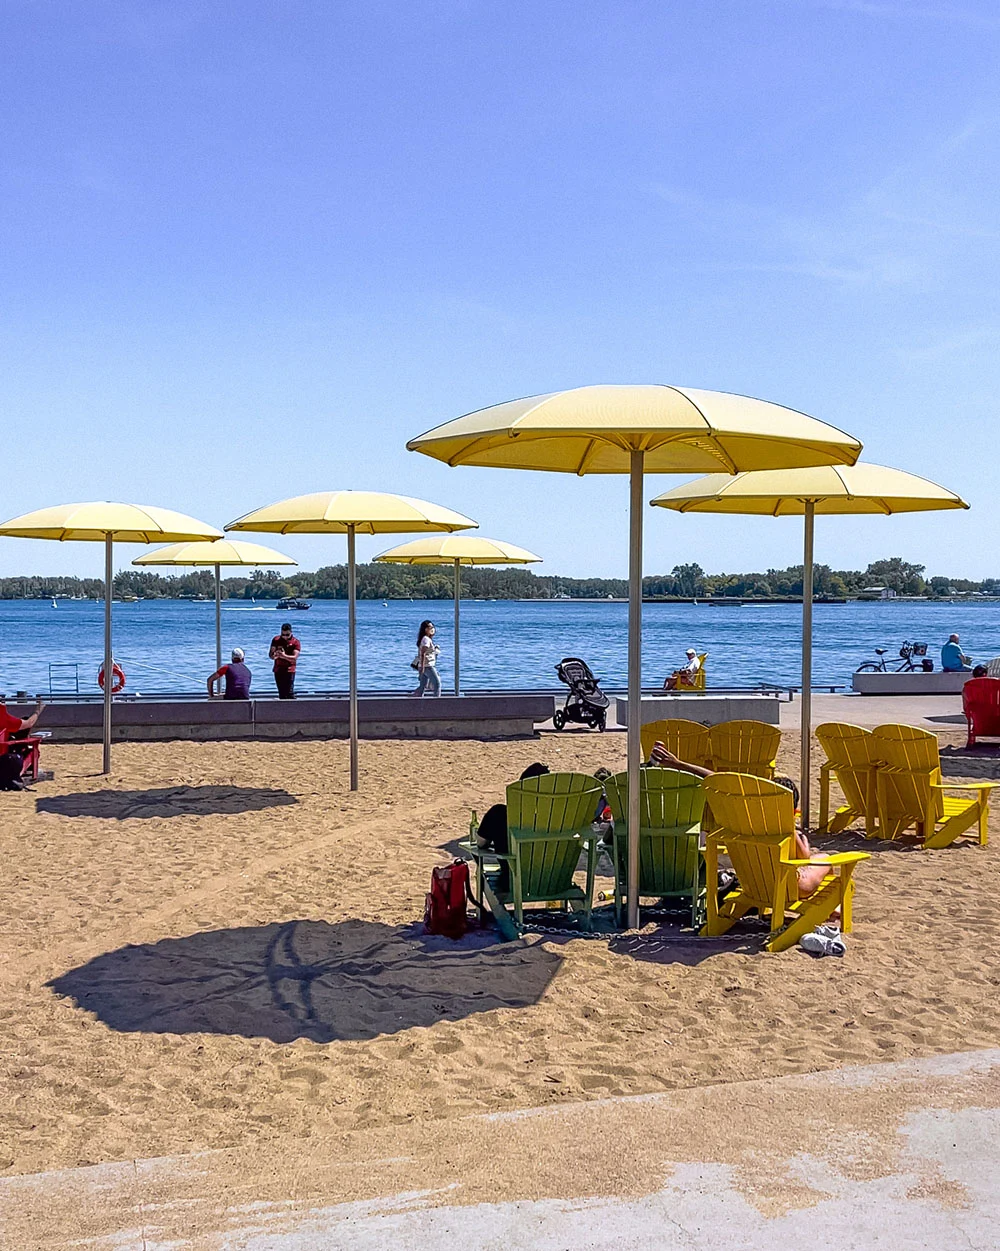 Looking for an incredible place to enjoy your next picnic in Toronto? This guide features some of the best picnic spots in Toronto from a local's perspective. Whether you're looking to picnic in a park, to spend your day sunning and snacking on a beach, prefer a garden hang, or want to check out a more unique destination, this guide has all of the best picnic spots for you to choose from. Pictured here: HTO Park West